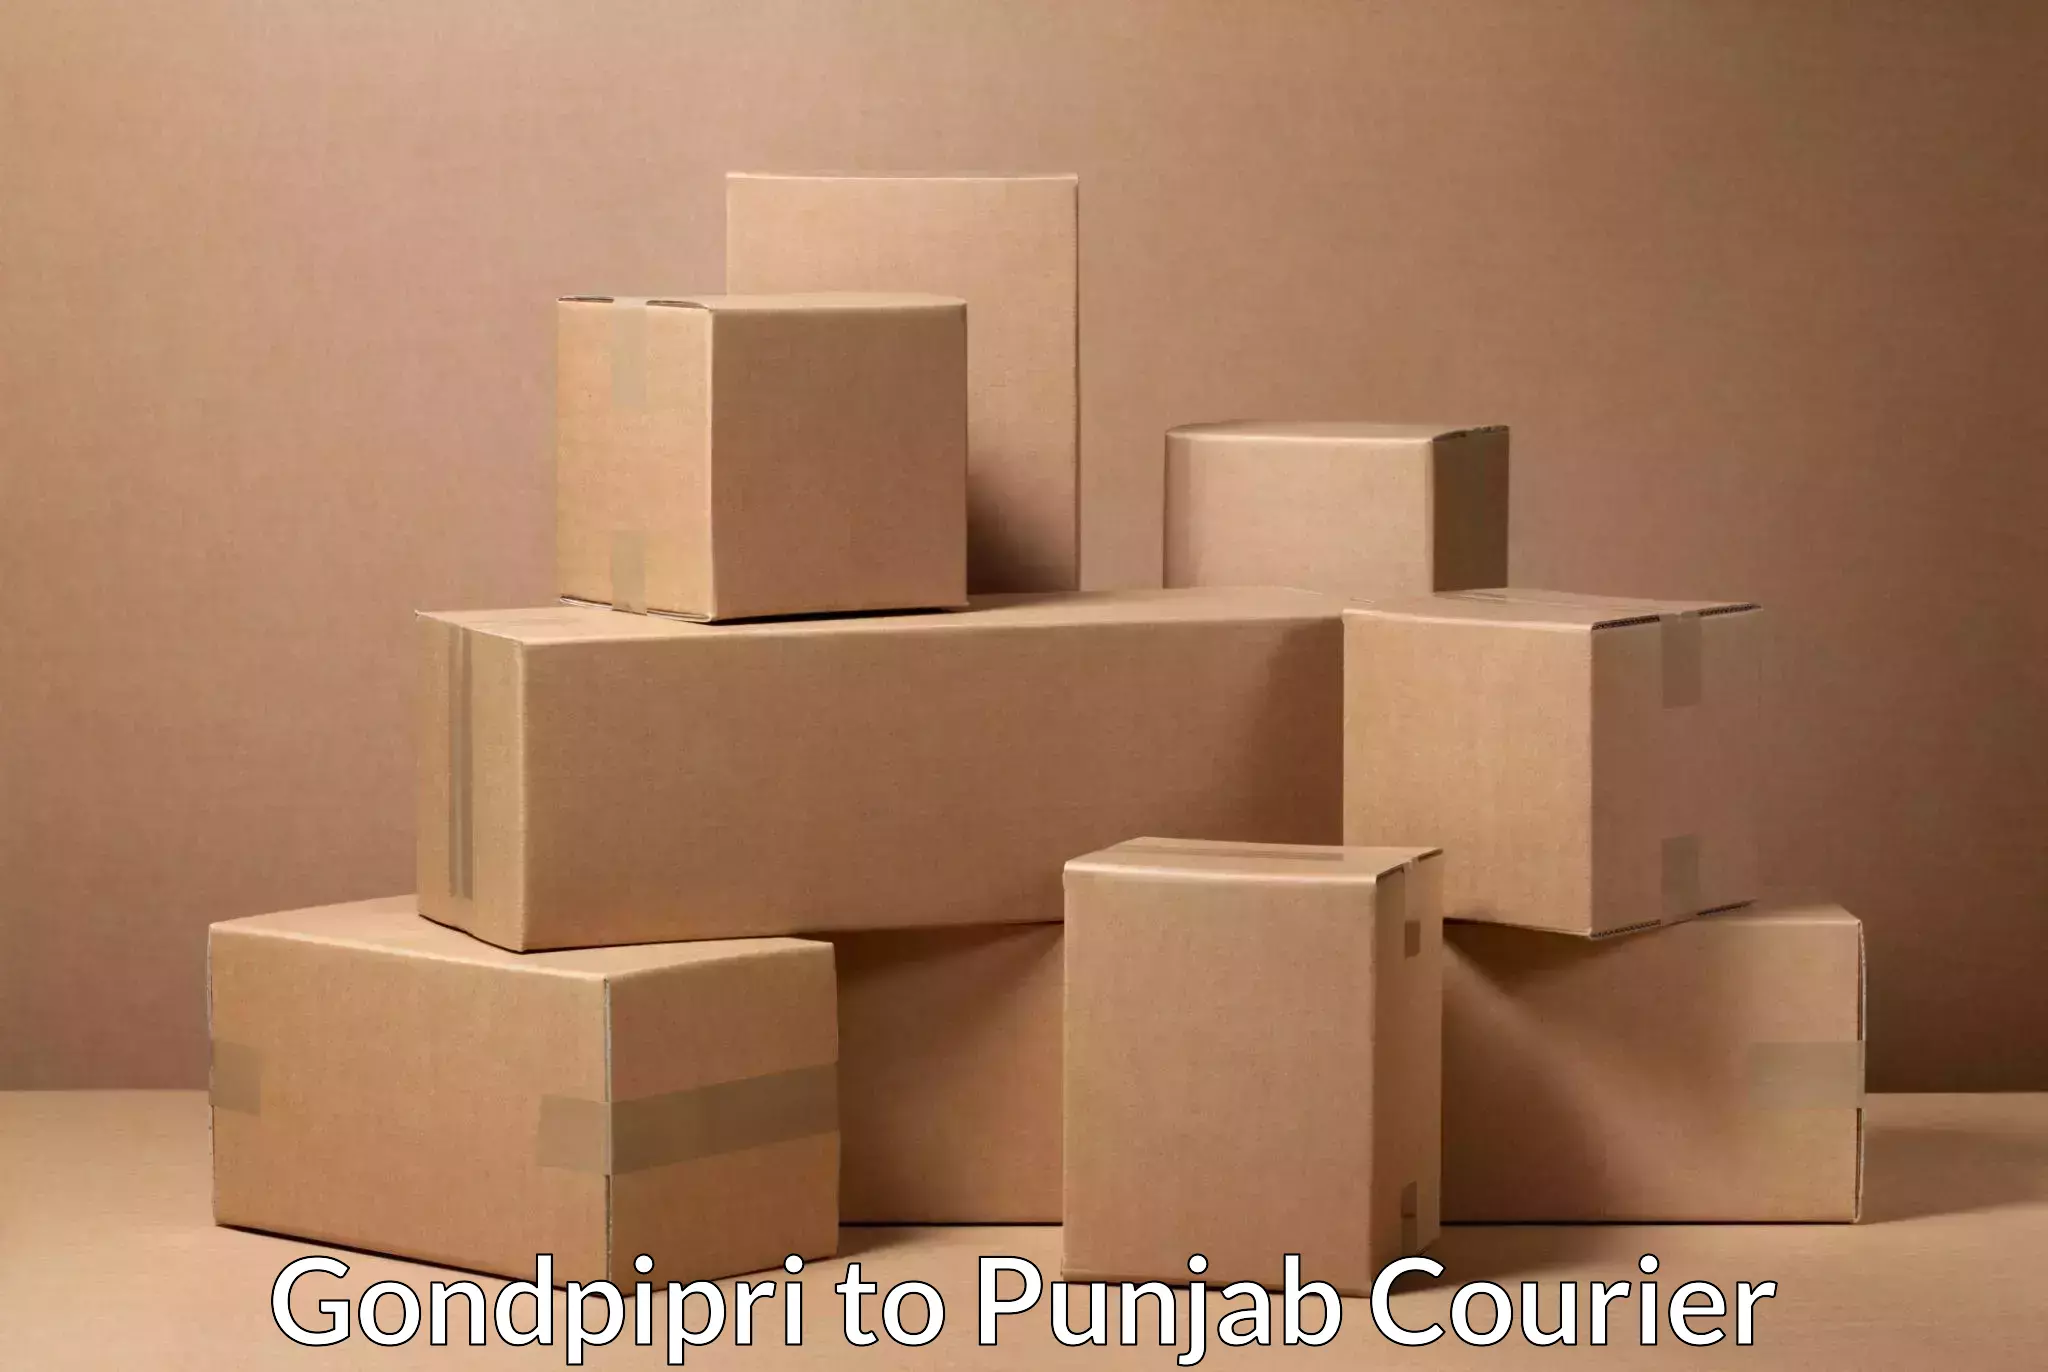 High-capacity courier solutions Gondpipri to Punjab